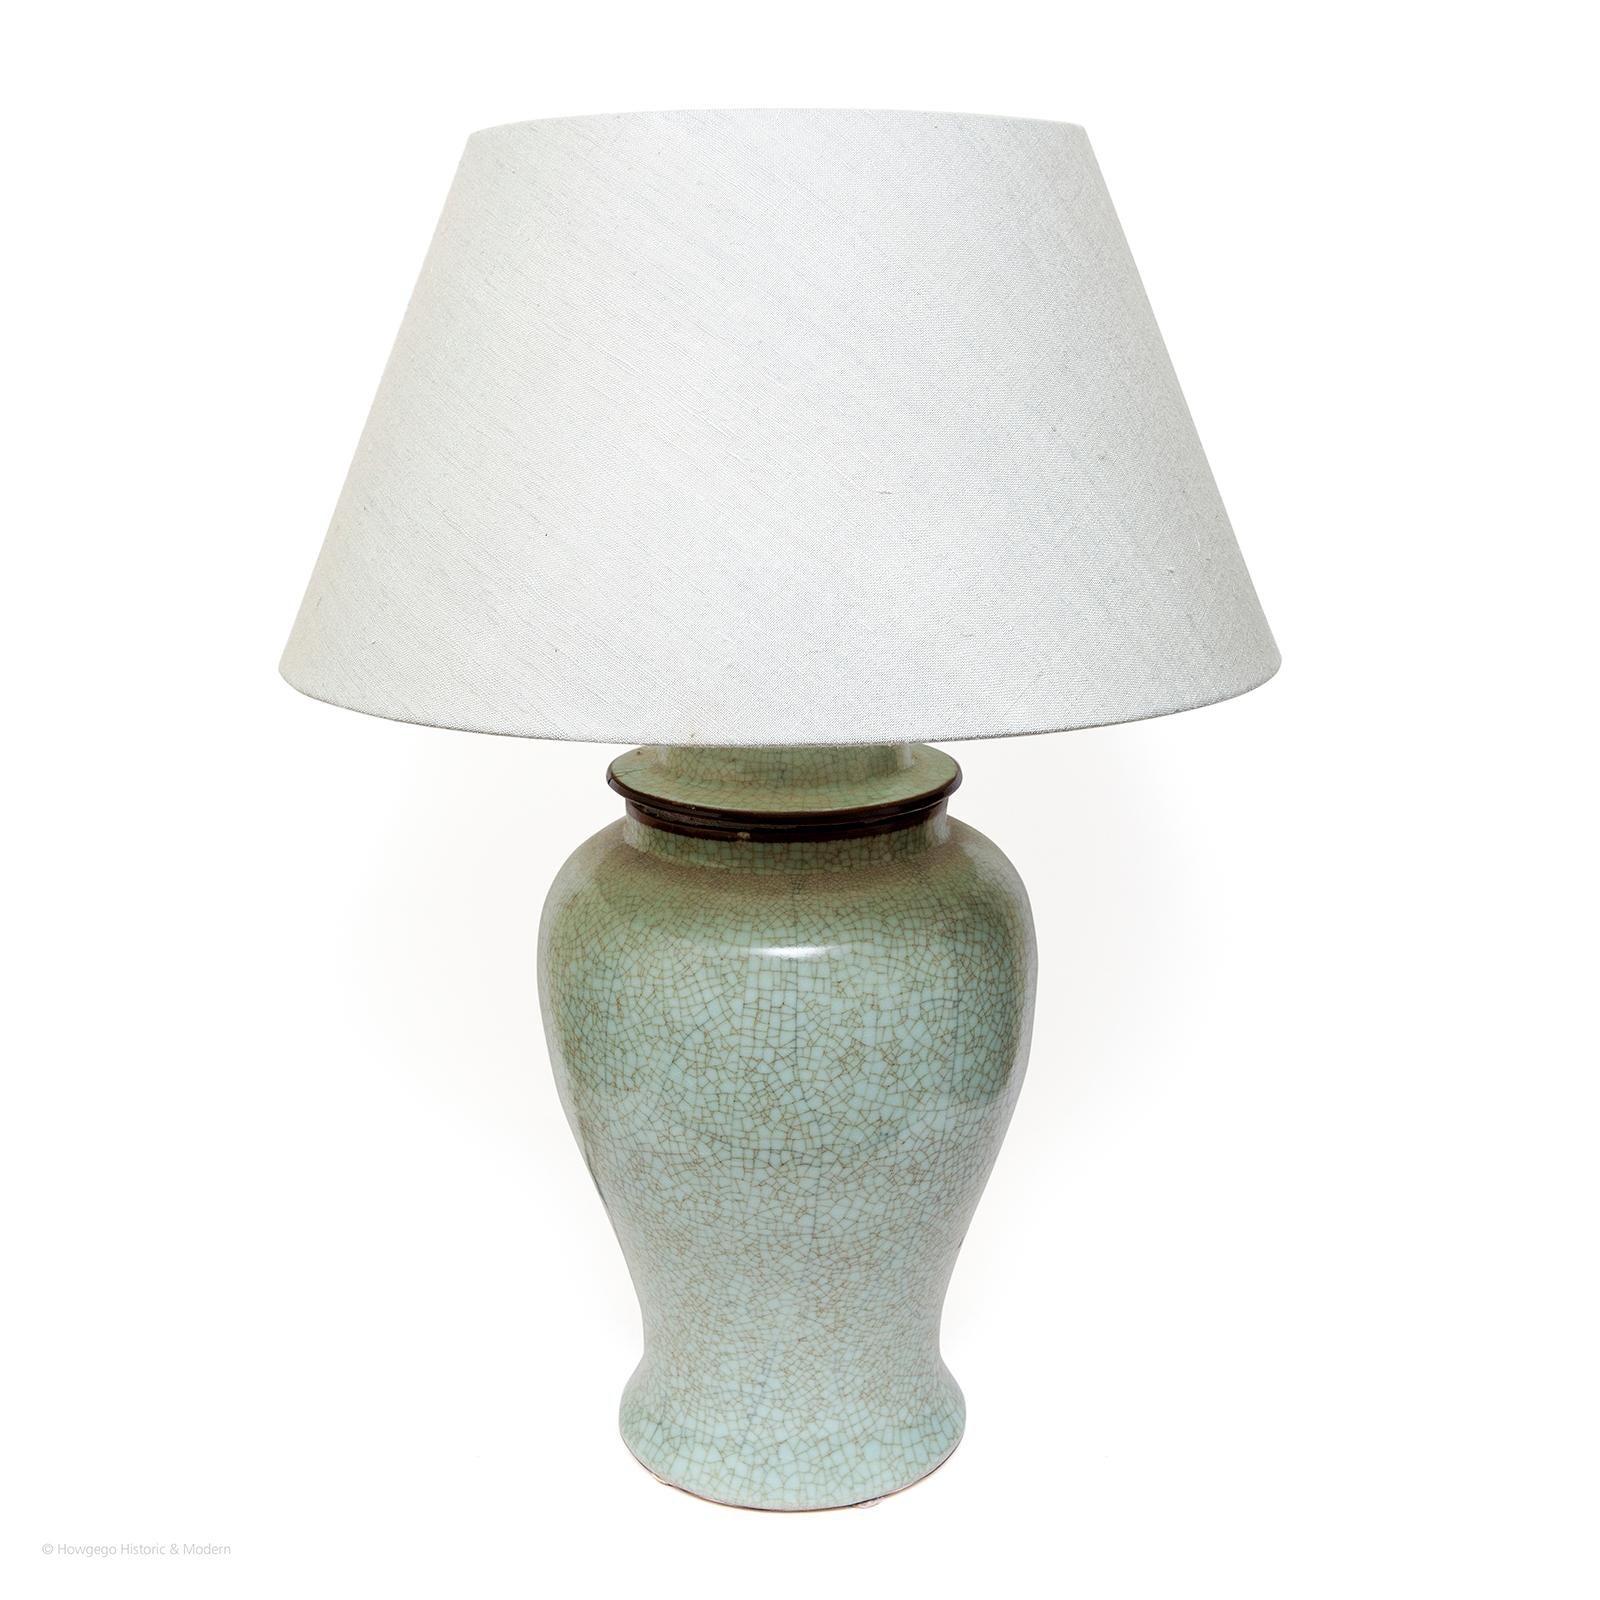 Large, vintage, Chinese, Celadon vase with cover, upcycled into table lamp with custom made linen shade, 32” high

Celadon ware has been prized for centuries for its beauty because it resembles jade
The vase has a soft undulating form.

Pale